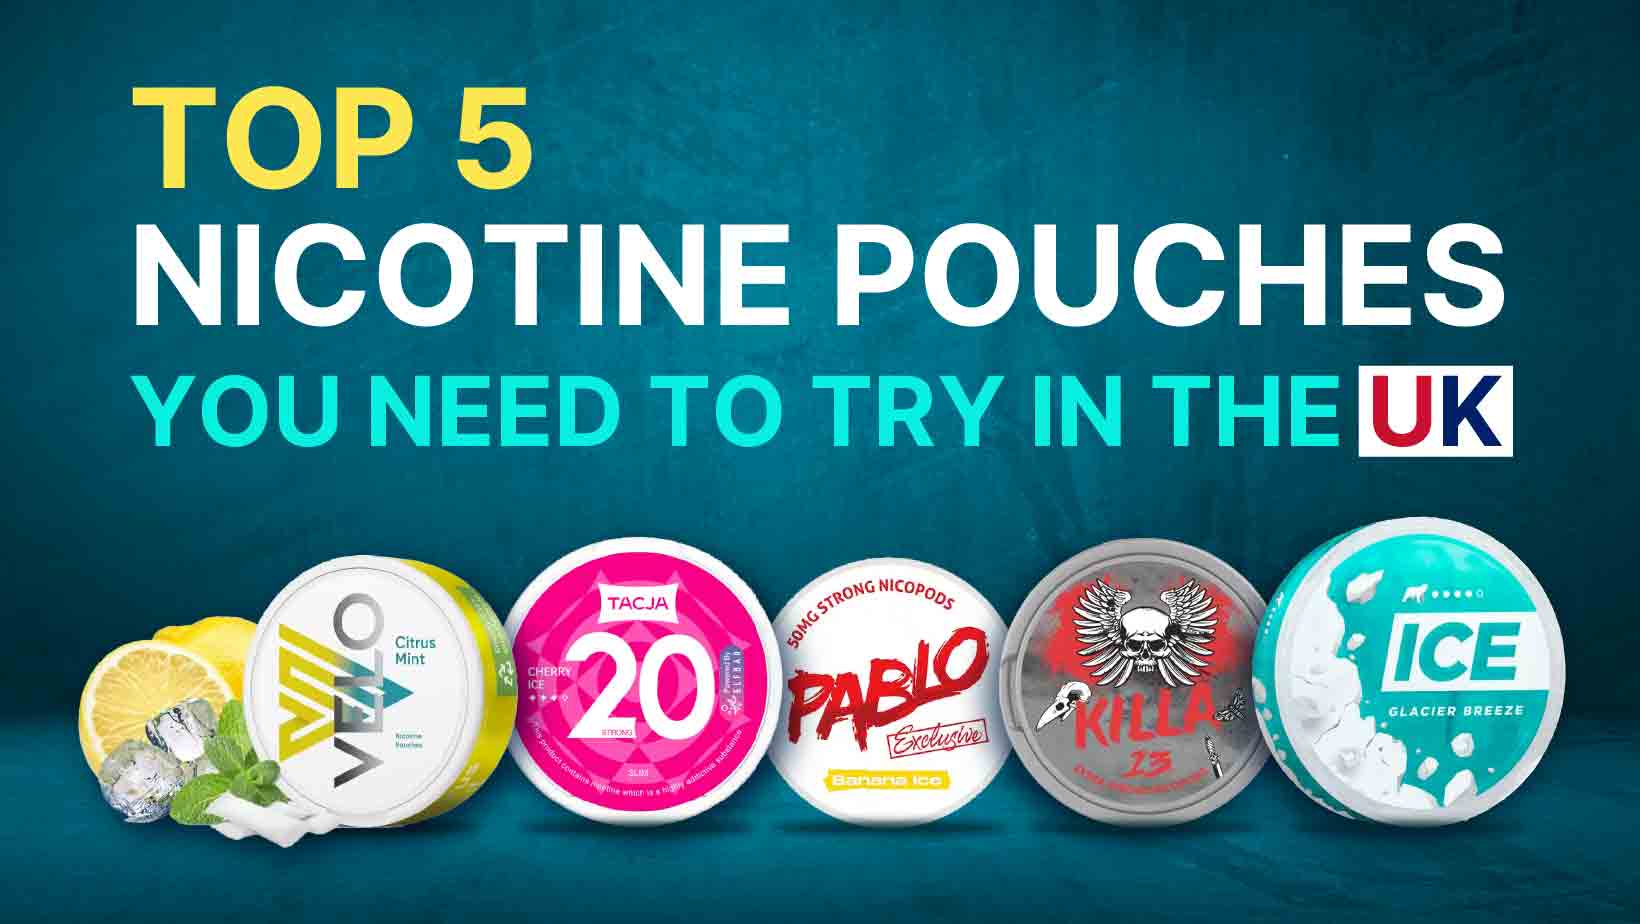 Top 5 Nicotine Pouches You Need To Try In The UK